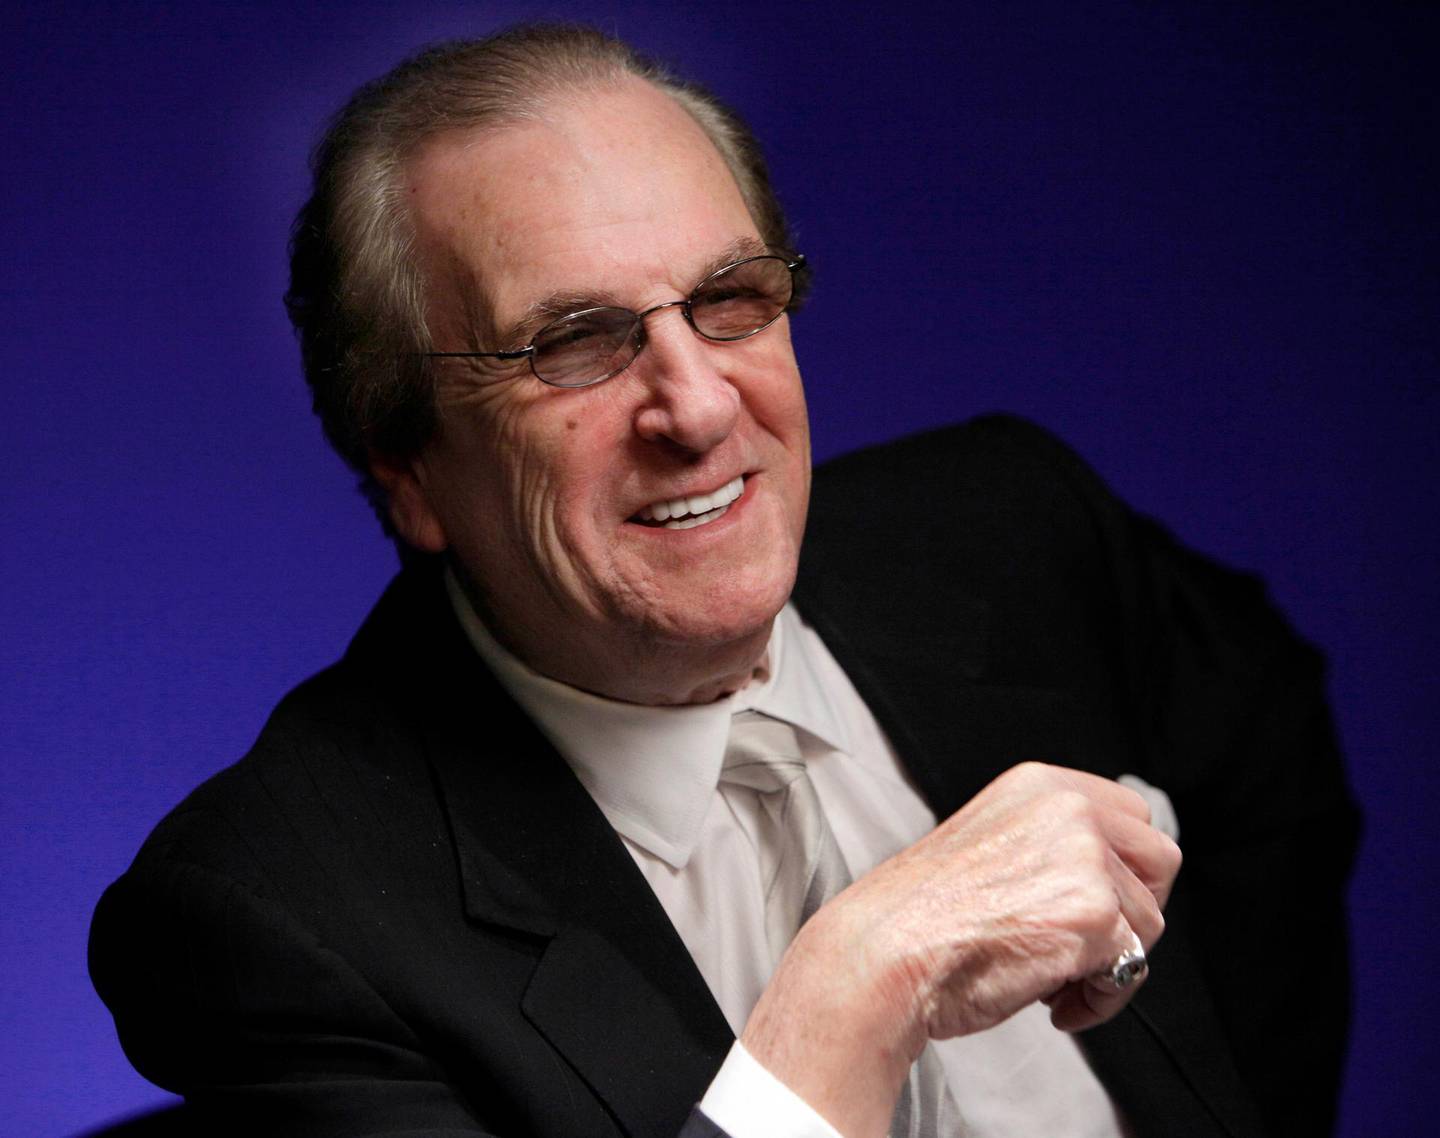 FILE - In this Friday, Oct. 7, 2011, file photo, actor Danny Aiello smiles while being photographed in New York. Aiello, the blue-collar character actor whose long career playing tough guys included roles in â€œFort Apache, the Bronx,â€  "The Godfather, Part II," â€œOnce Upon a Time in Americaâ€ and his Oscar-nominated performance as a pizza man in Spike Leeâ€™s "Do the Right Thing," has died. He was 86. Aiello died Thursday, Dec. 12, 2019 after a brief illness, said his publicist, Tracey Miller.  (AP Photo/Richard Drew, File)